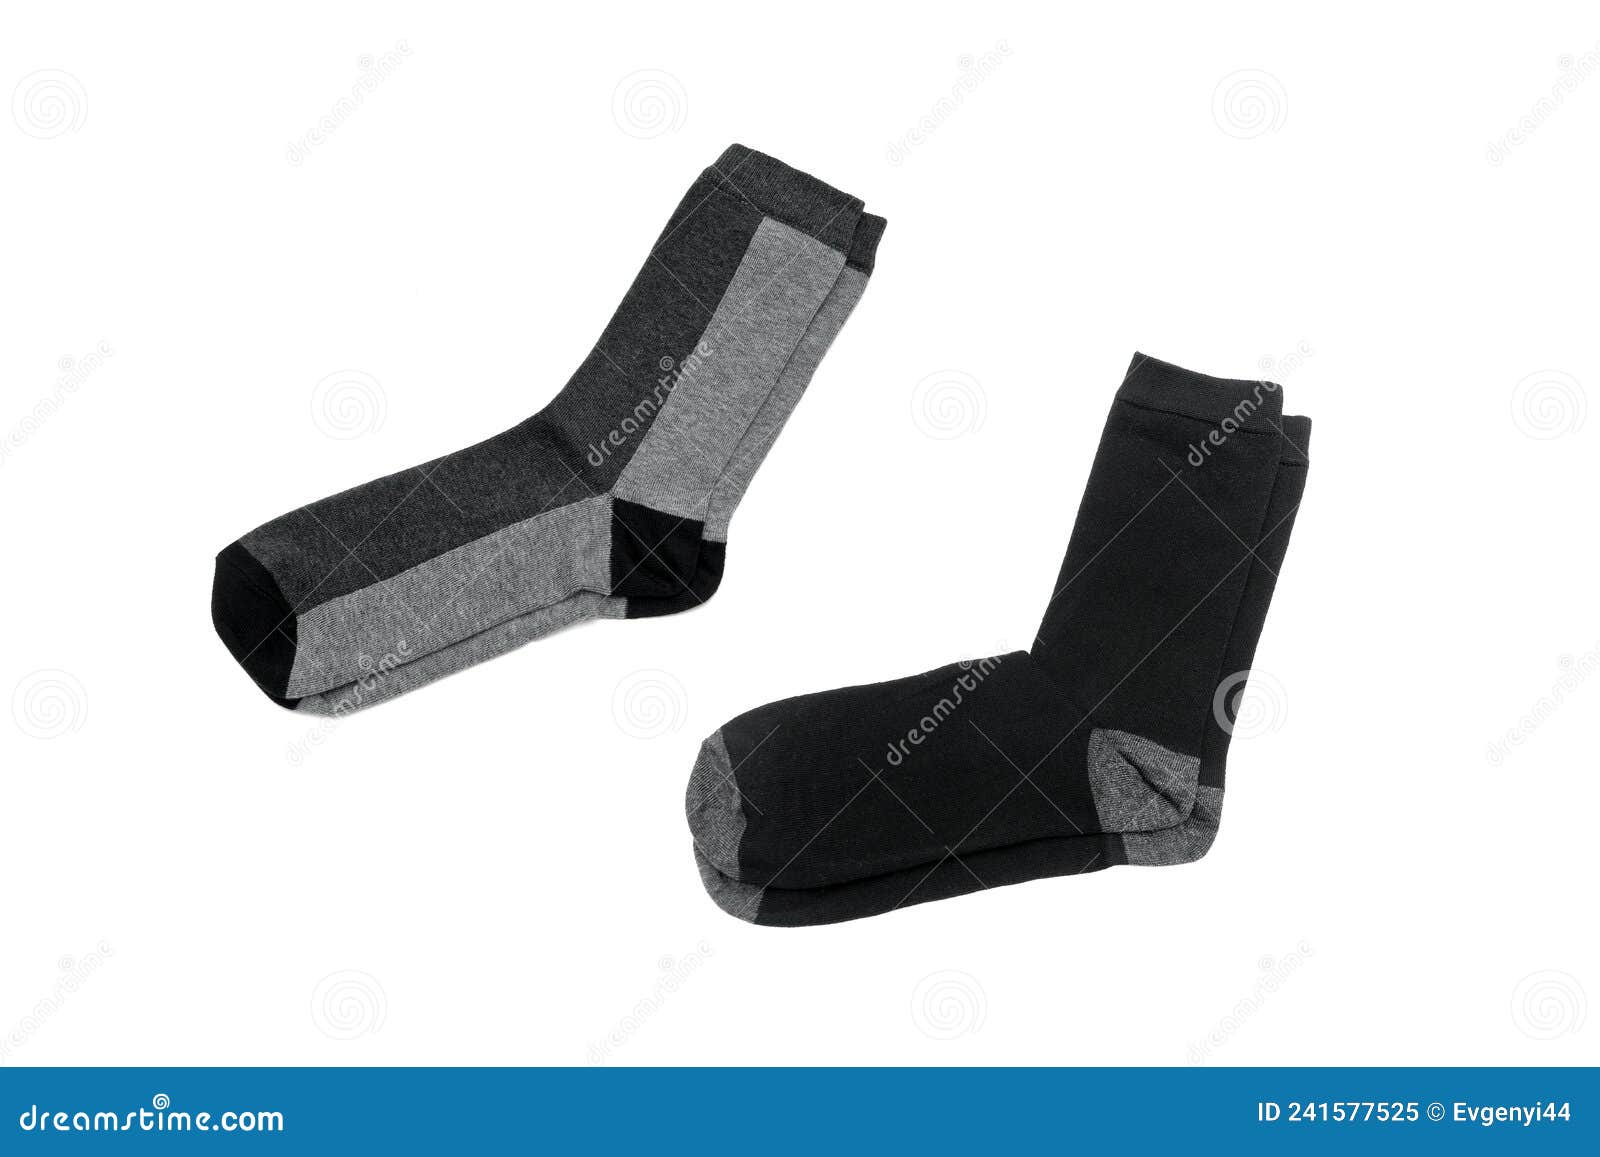 Different Socks for Feet Isolated on White Background Stock Image ...